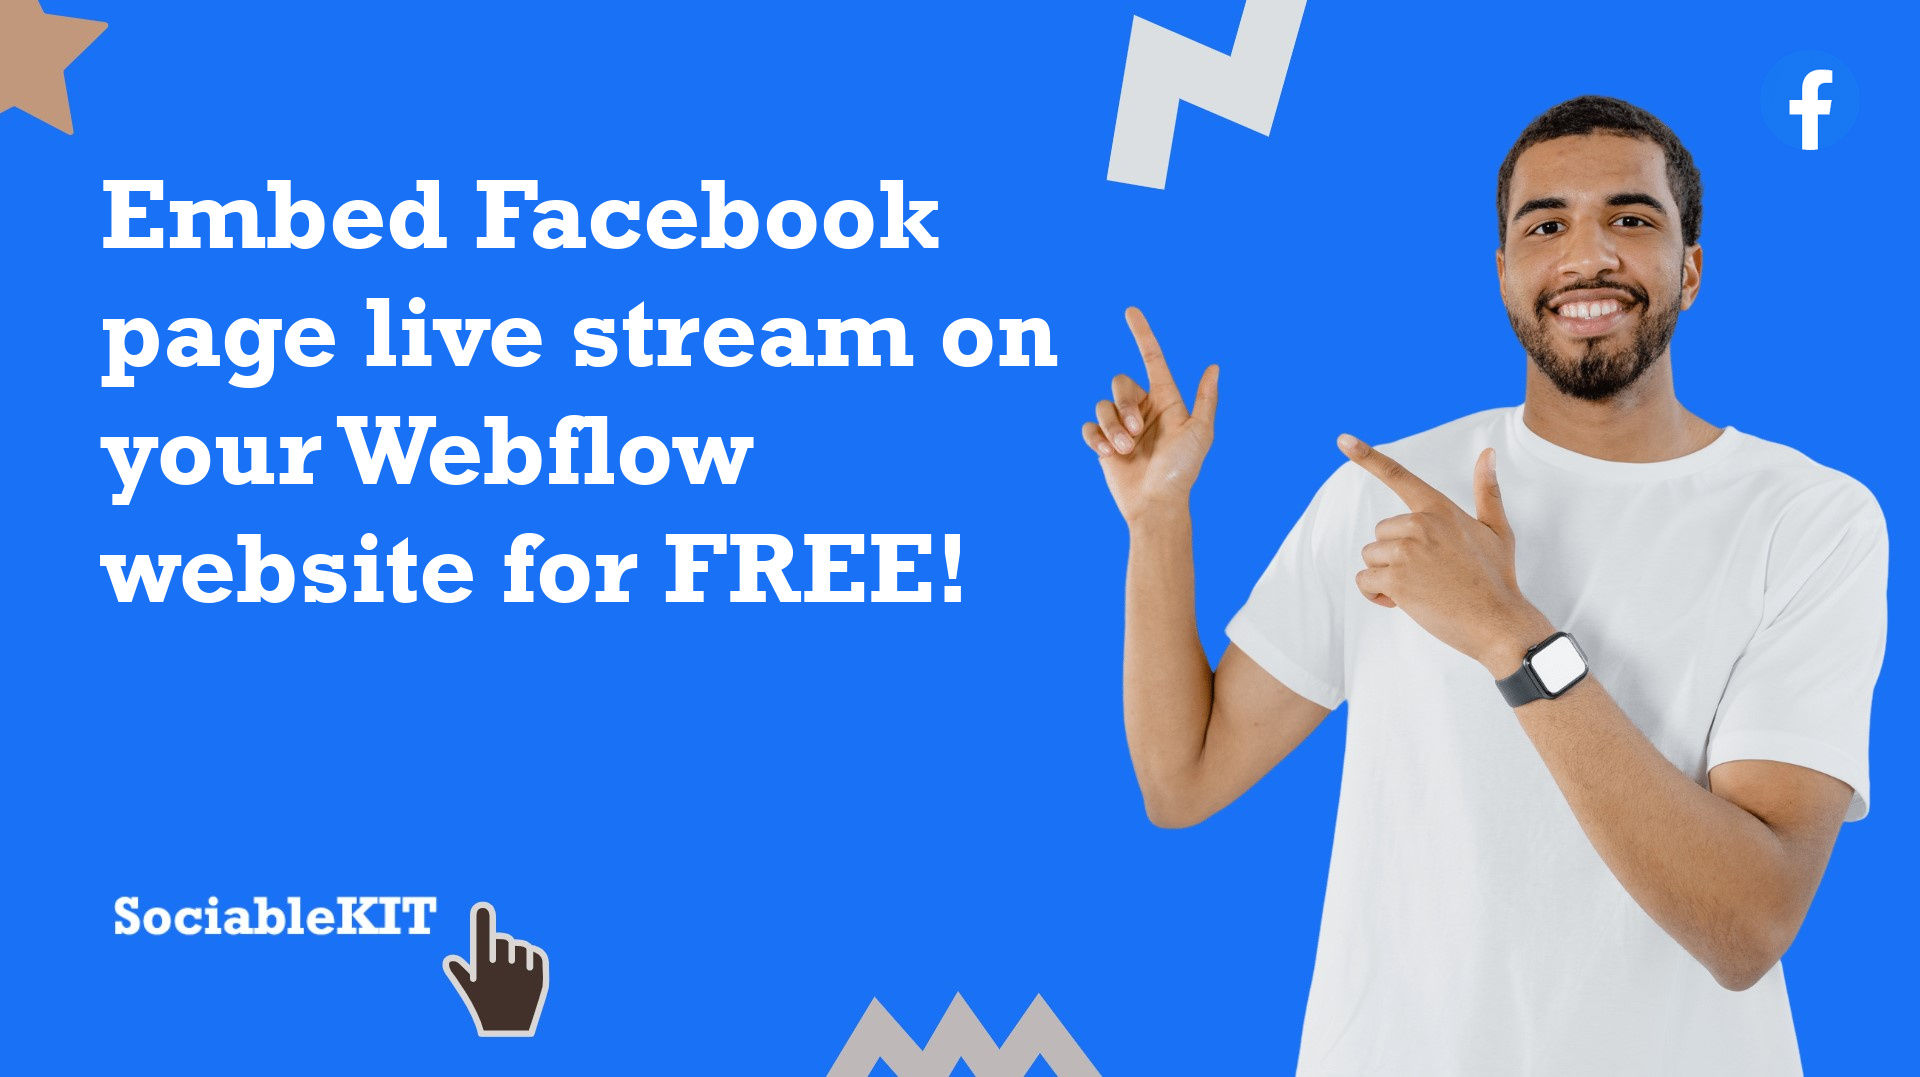 How to embed Facebook page live stream on your Webflow website for FREE?